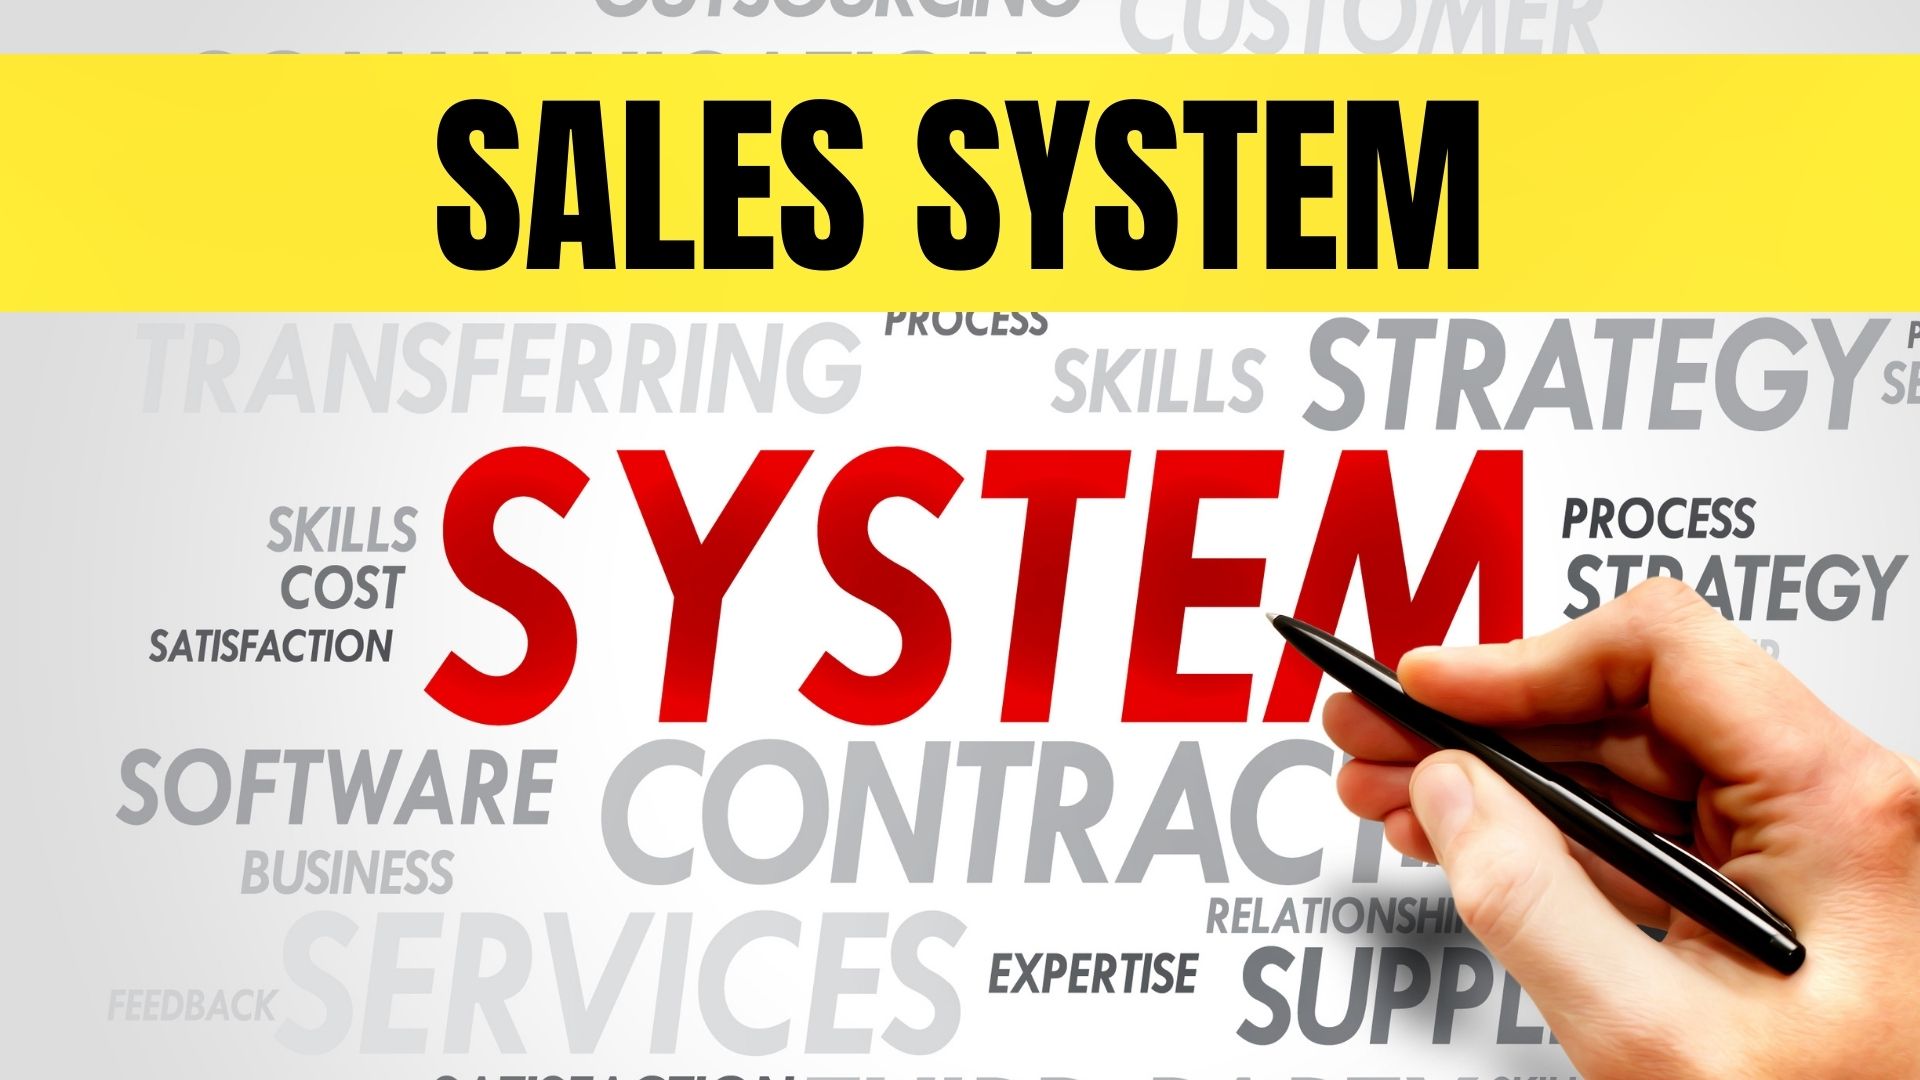 Sales system course